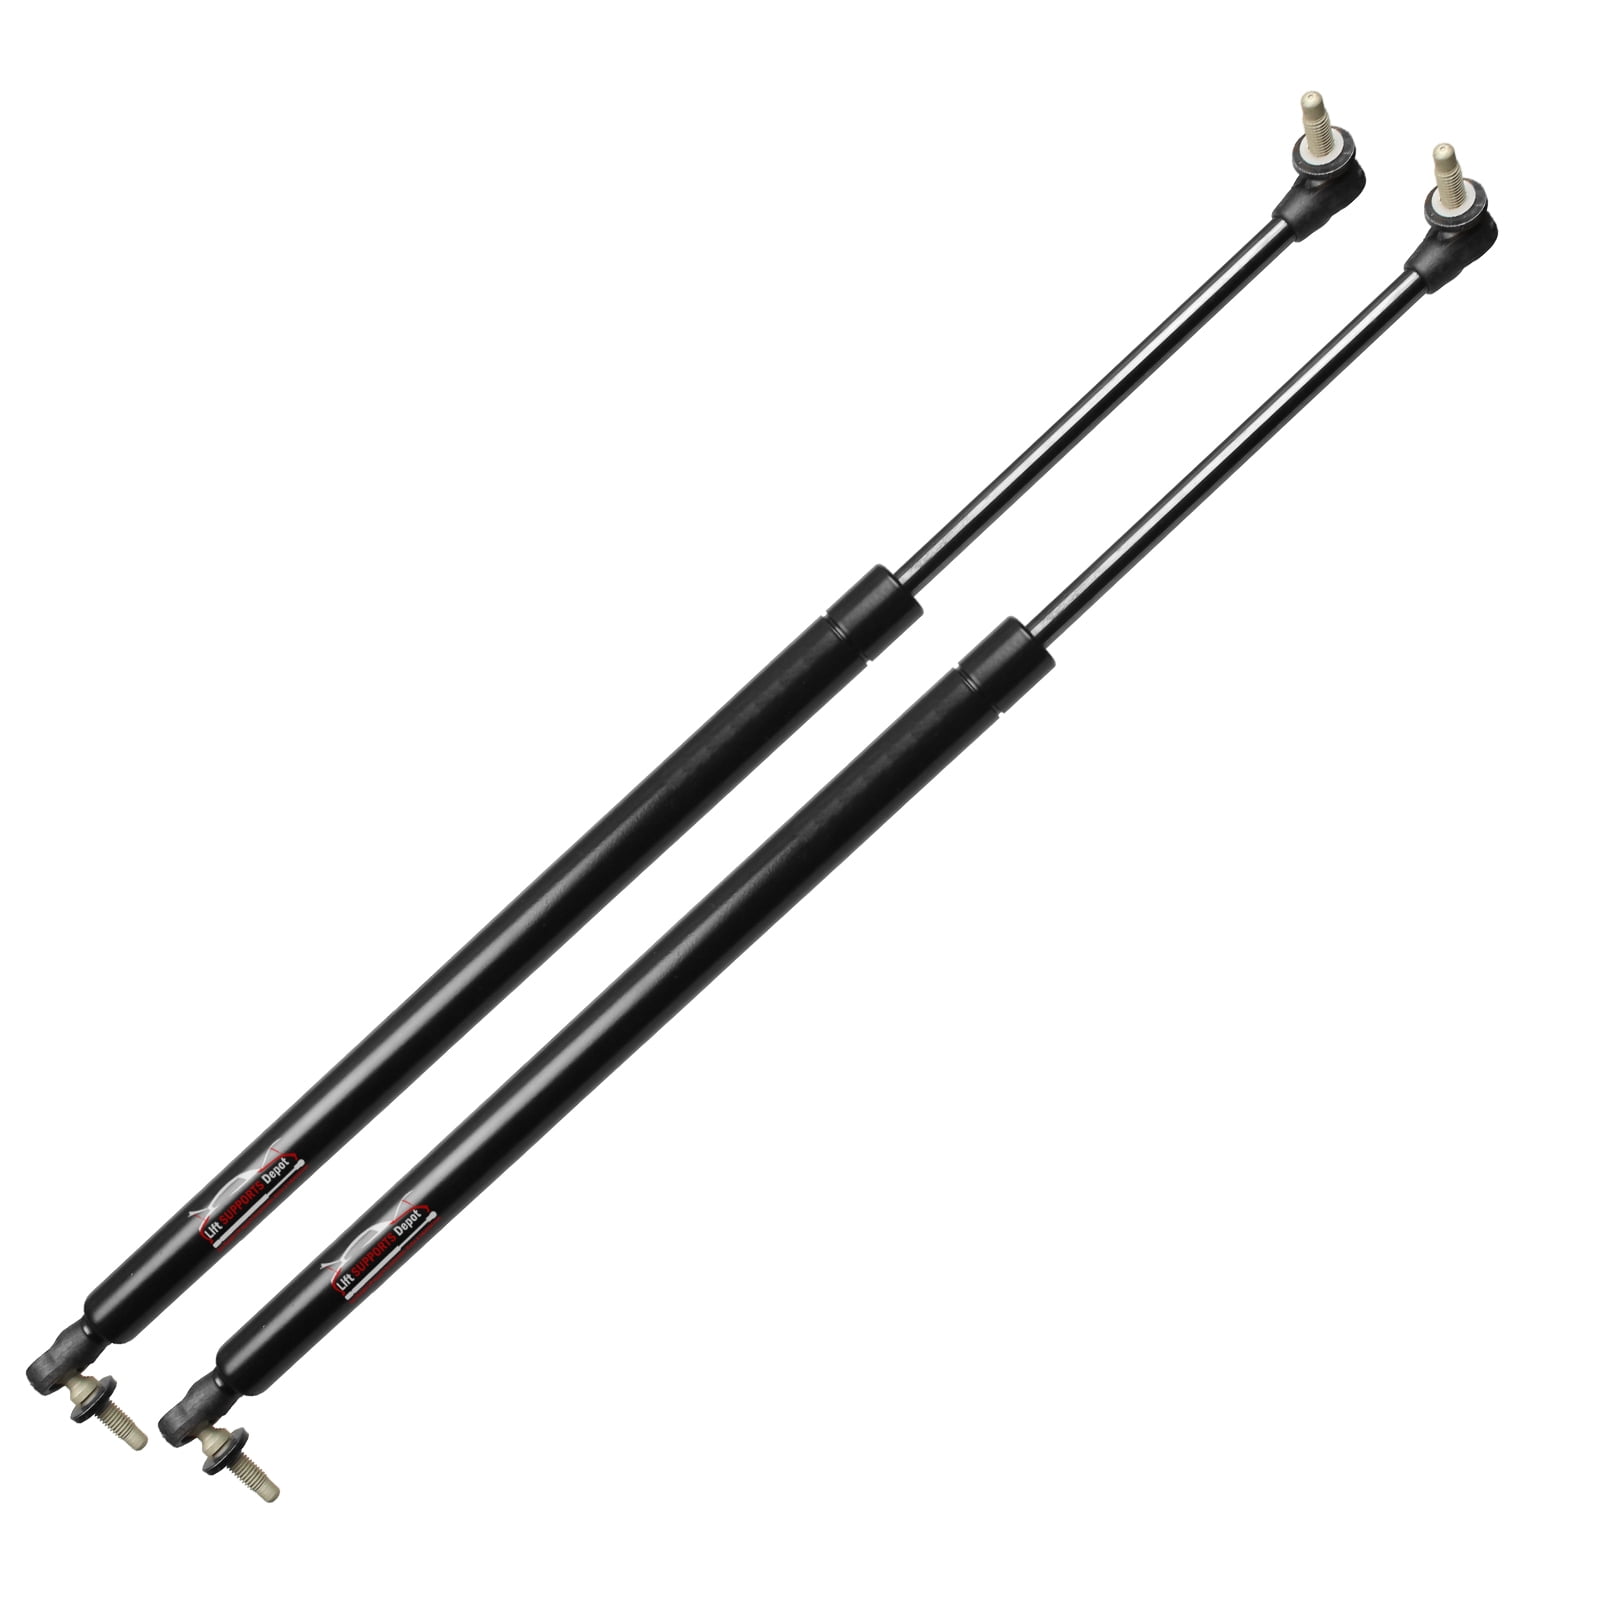 2 Qty Front Hood Gas Charged Lift Supports Struts Shocks For 2002-2005 Acura TL 